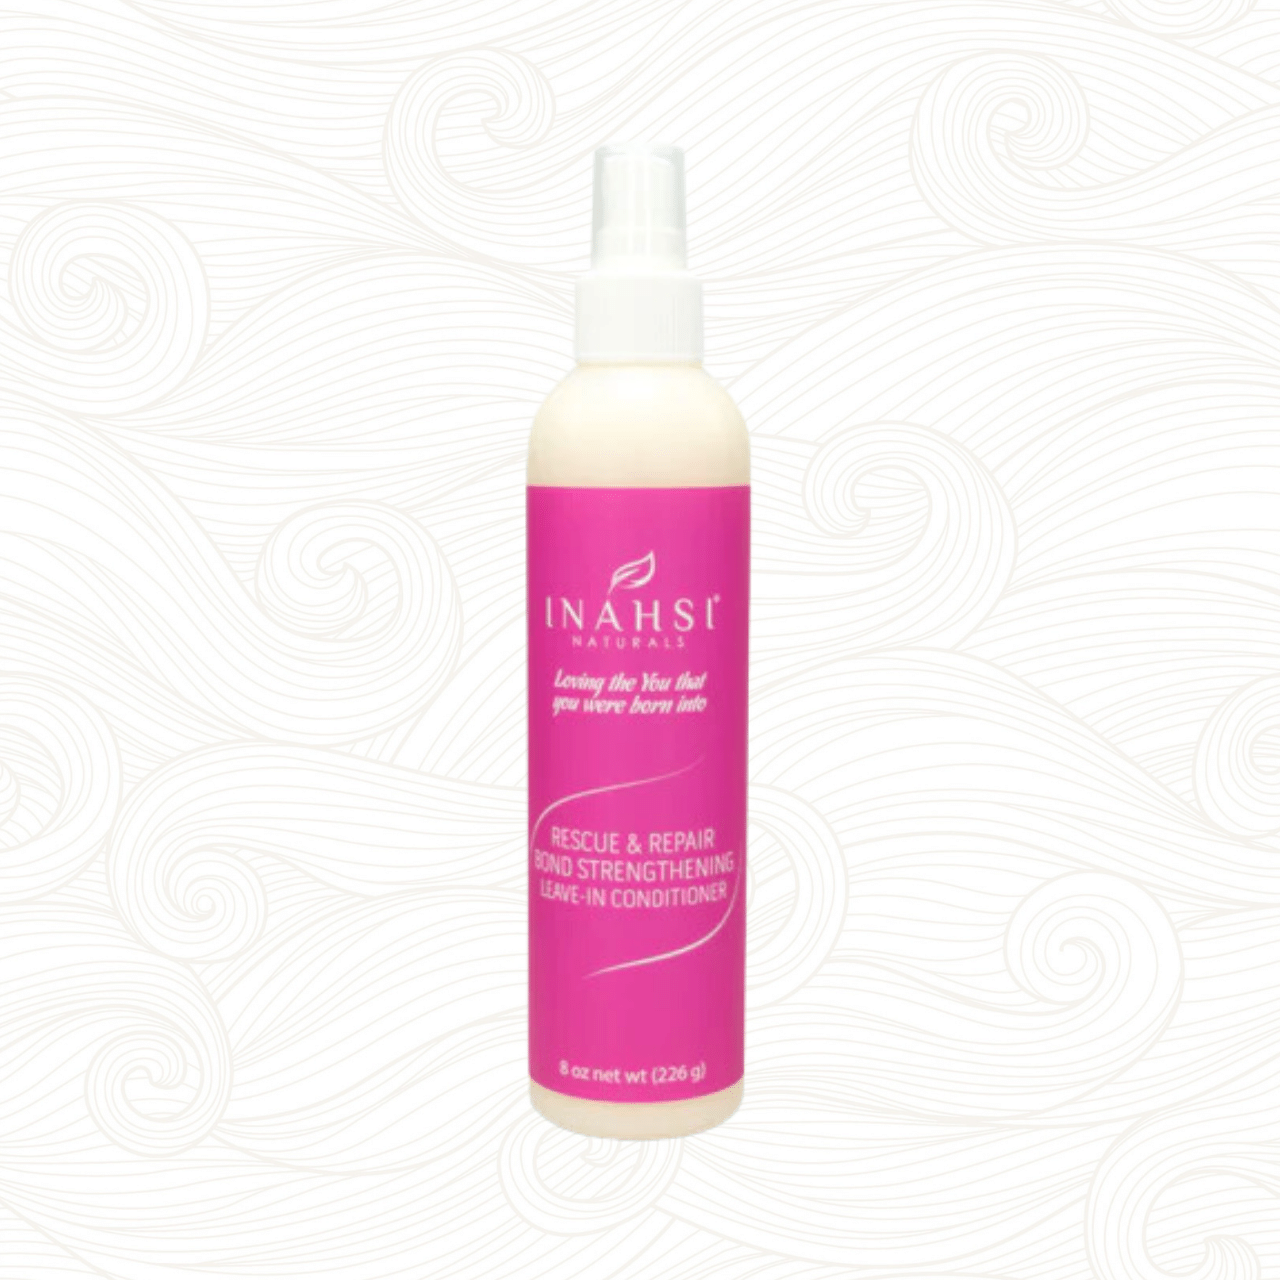 Inahsi |  Rescue & Repair Bond Strengthening Leave-In Conditioner /ab 59ml Leave-In Inahsi